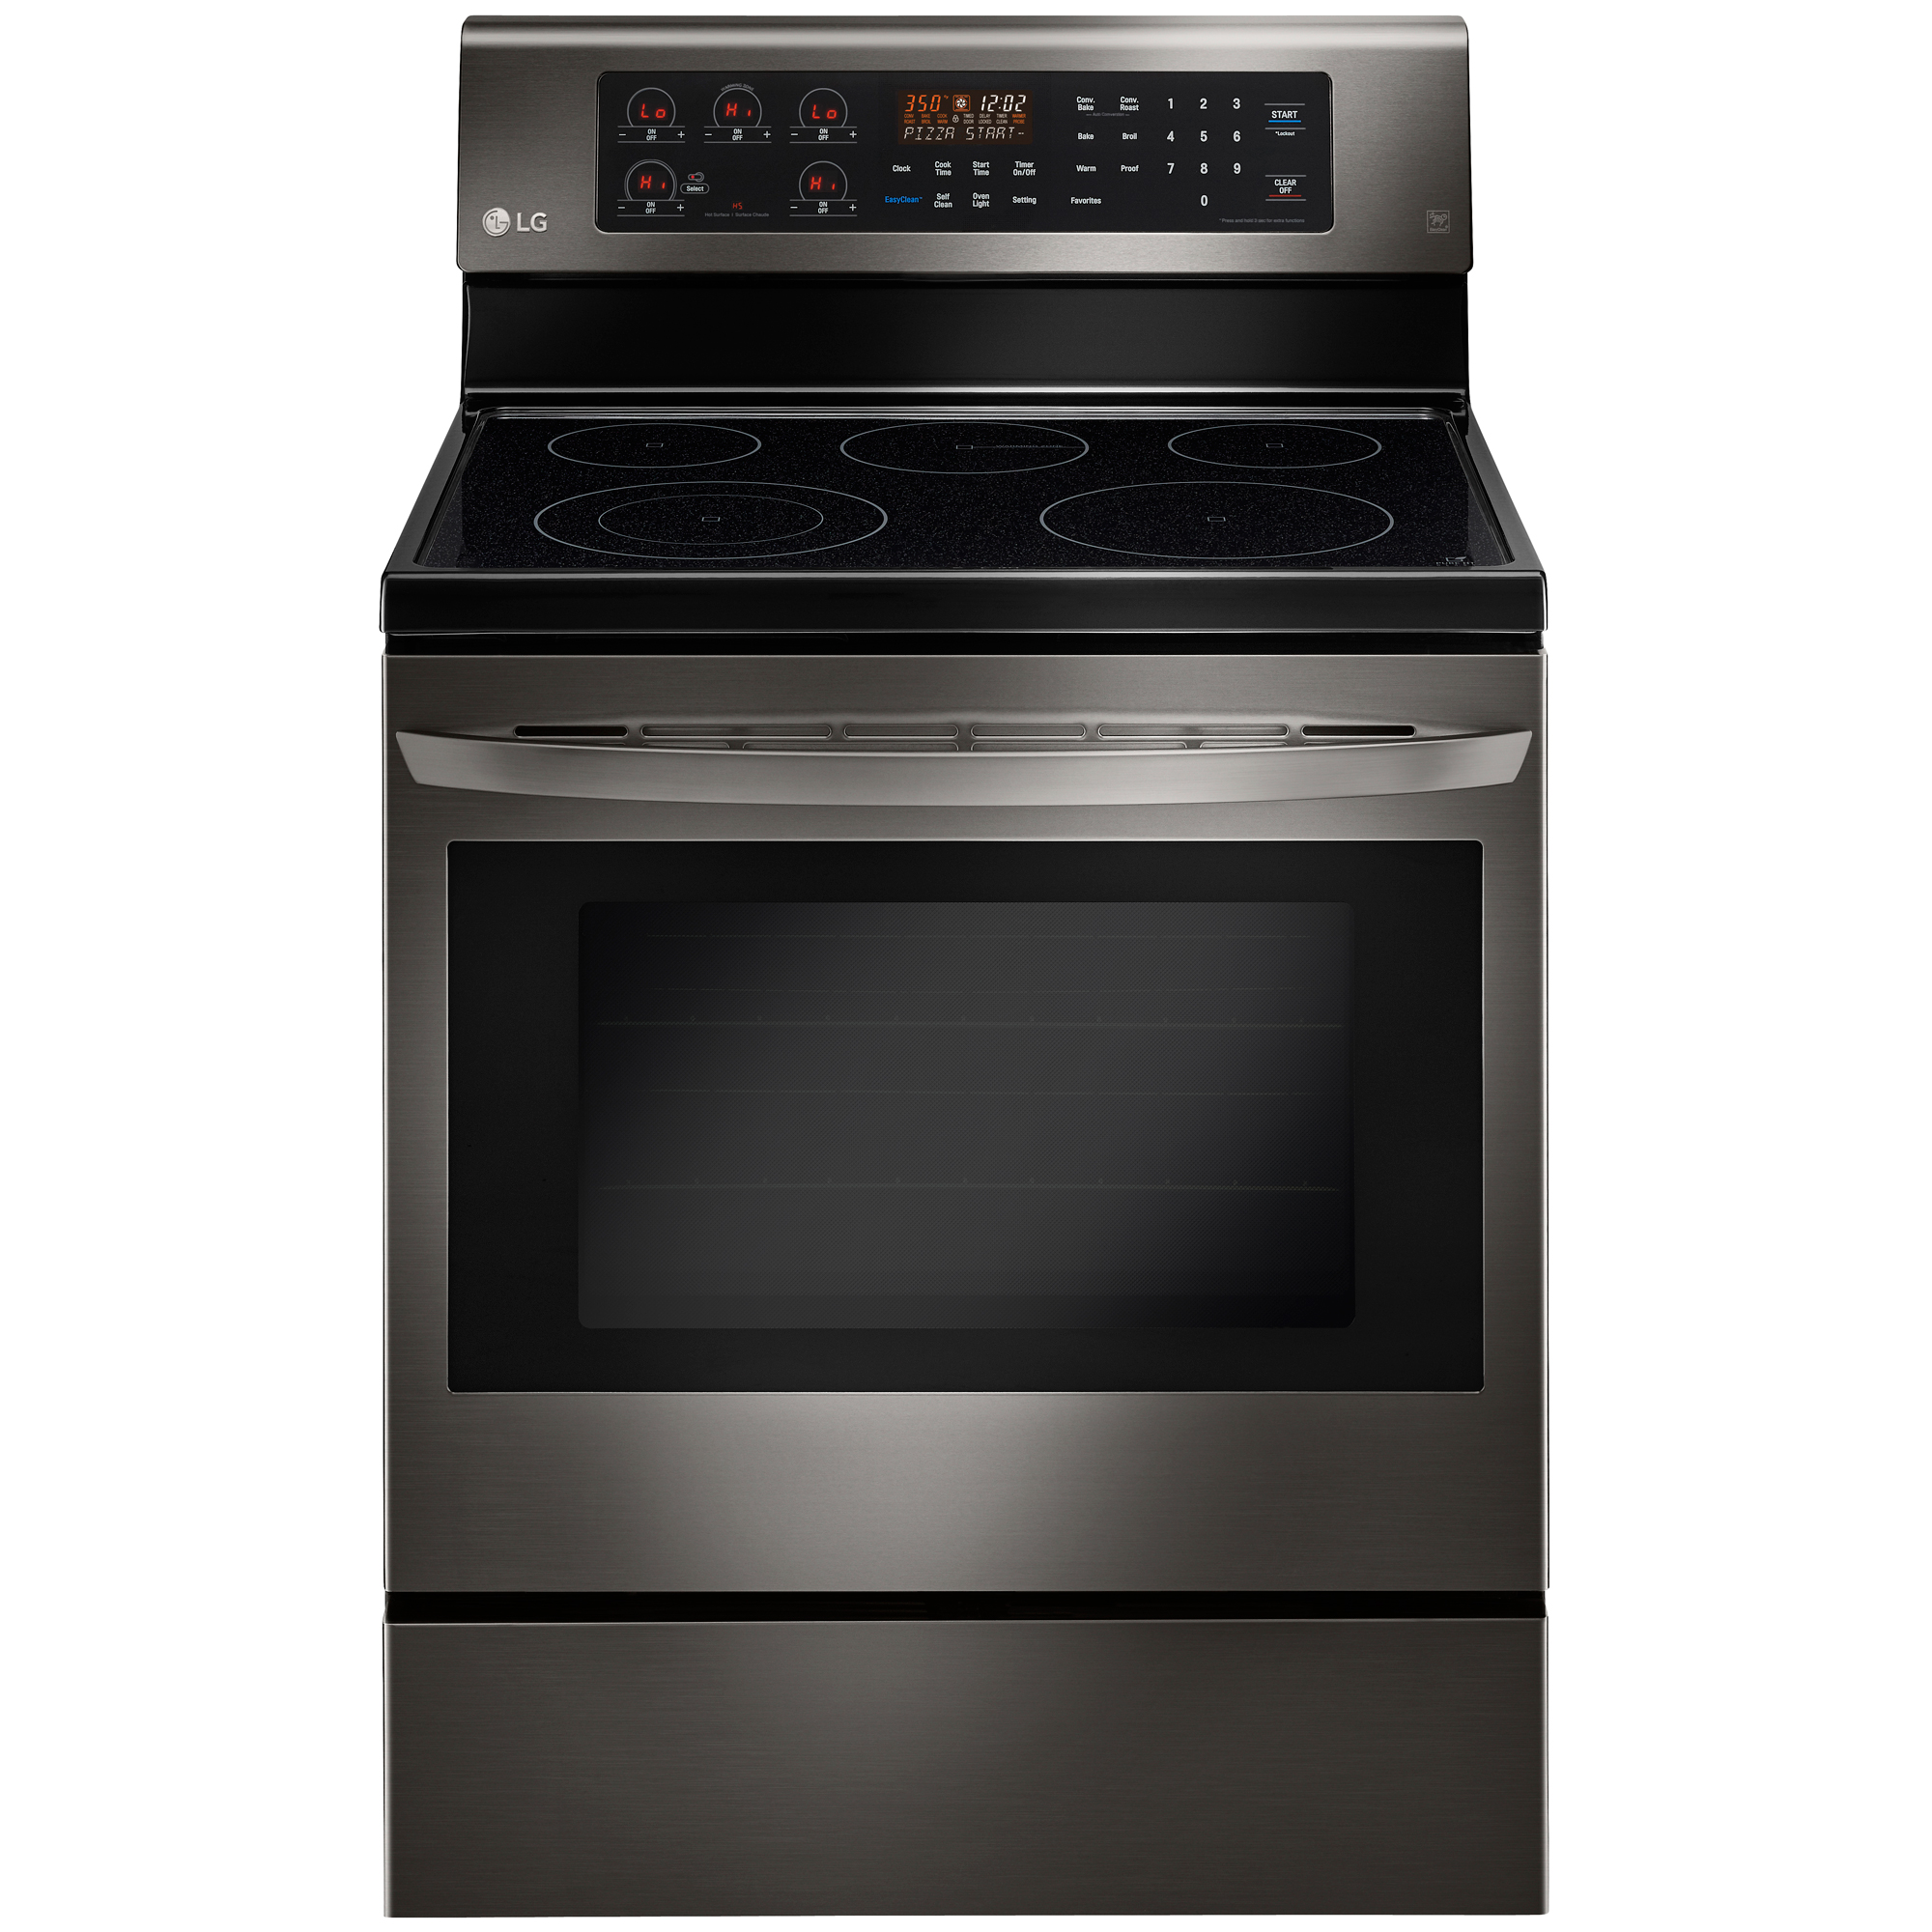 LG - LRE3083BD - 6.3 cu. ft. Free-Standing Electric Range - Black Electric Black Stainless Steel Stove